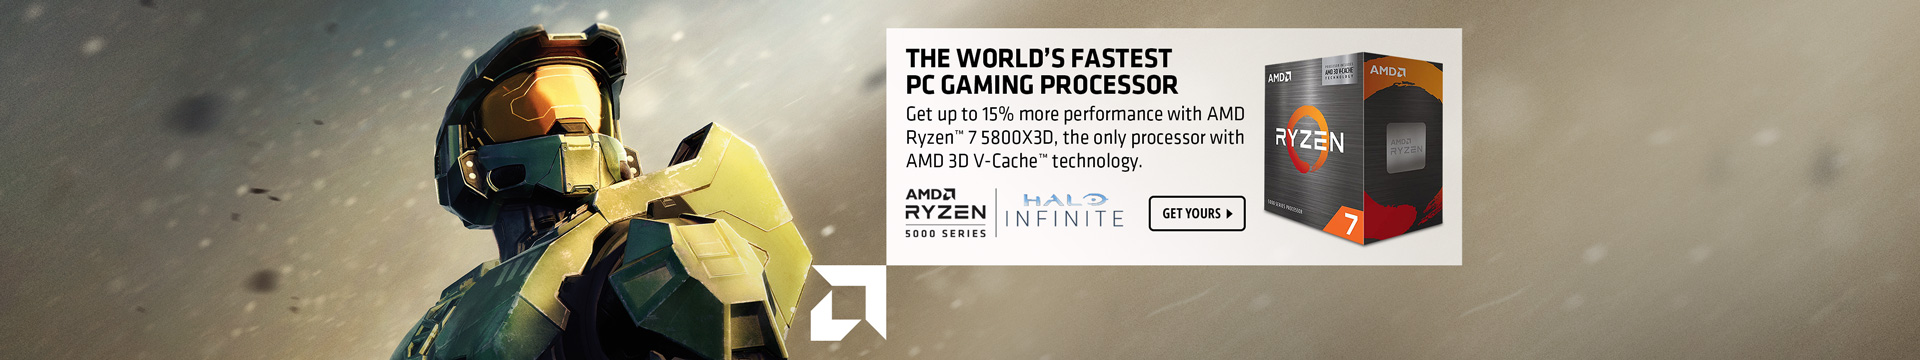 The World's Fastest PC Gaming Processor